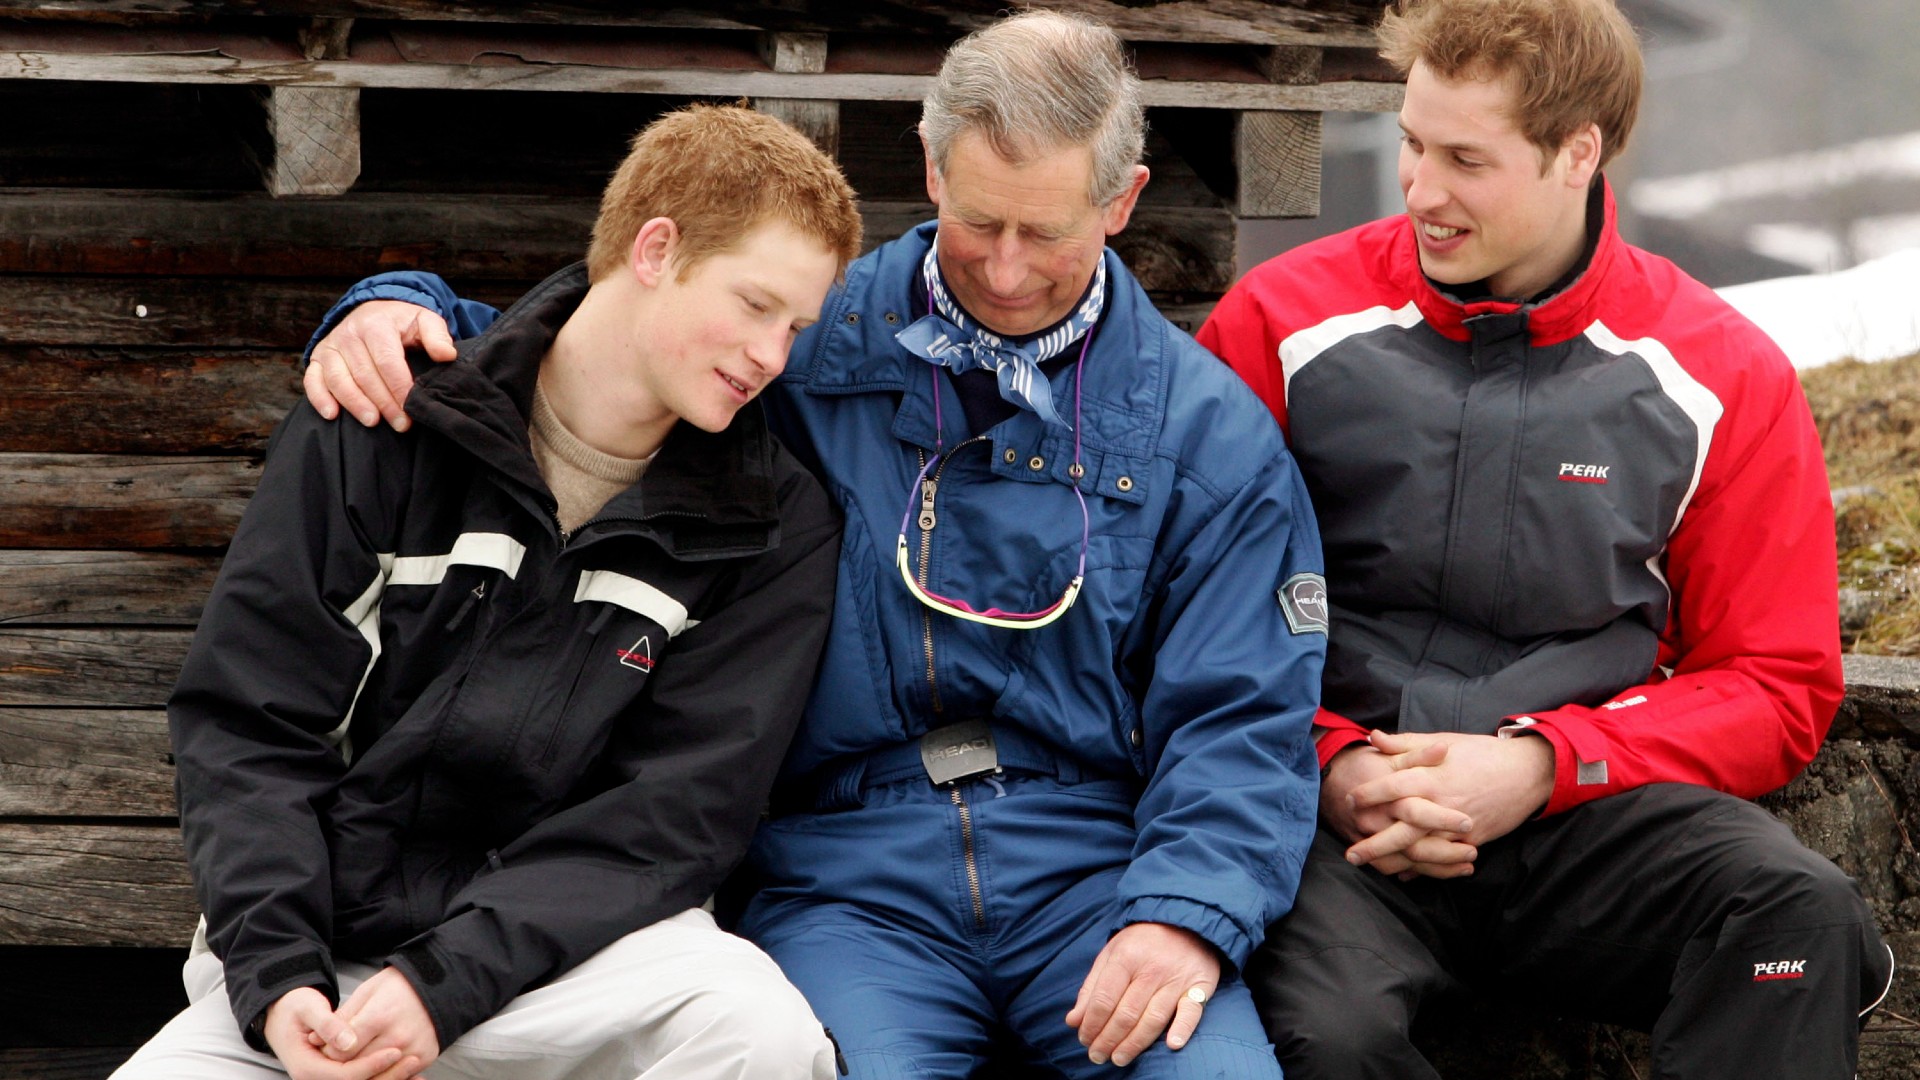 Prince Harry has "torpedoed" any "remaining bridges" with King Charles